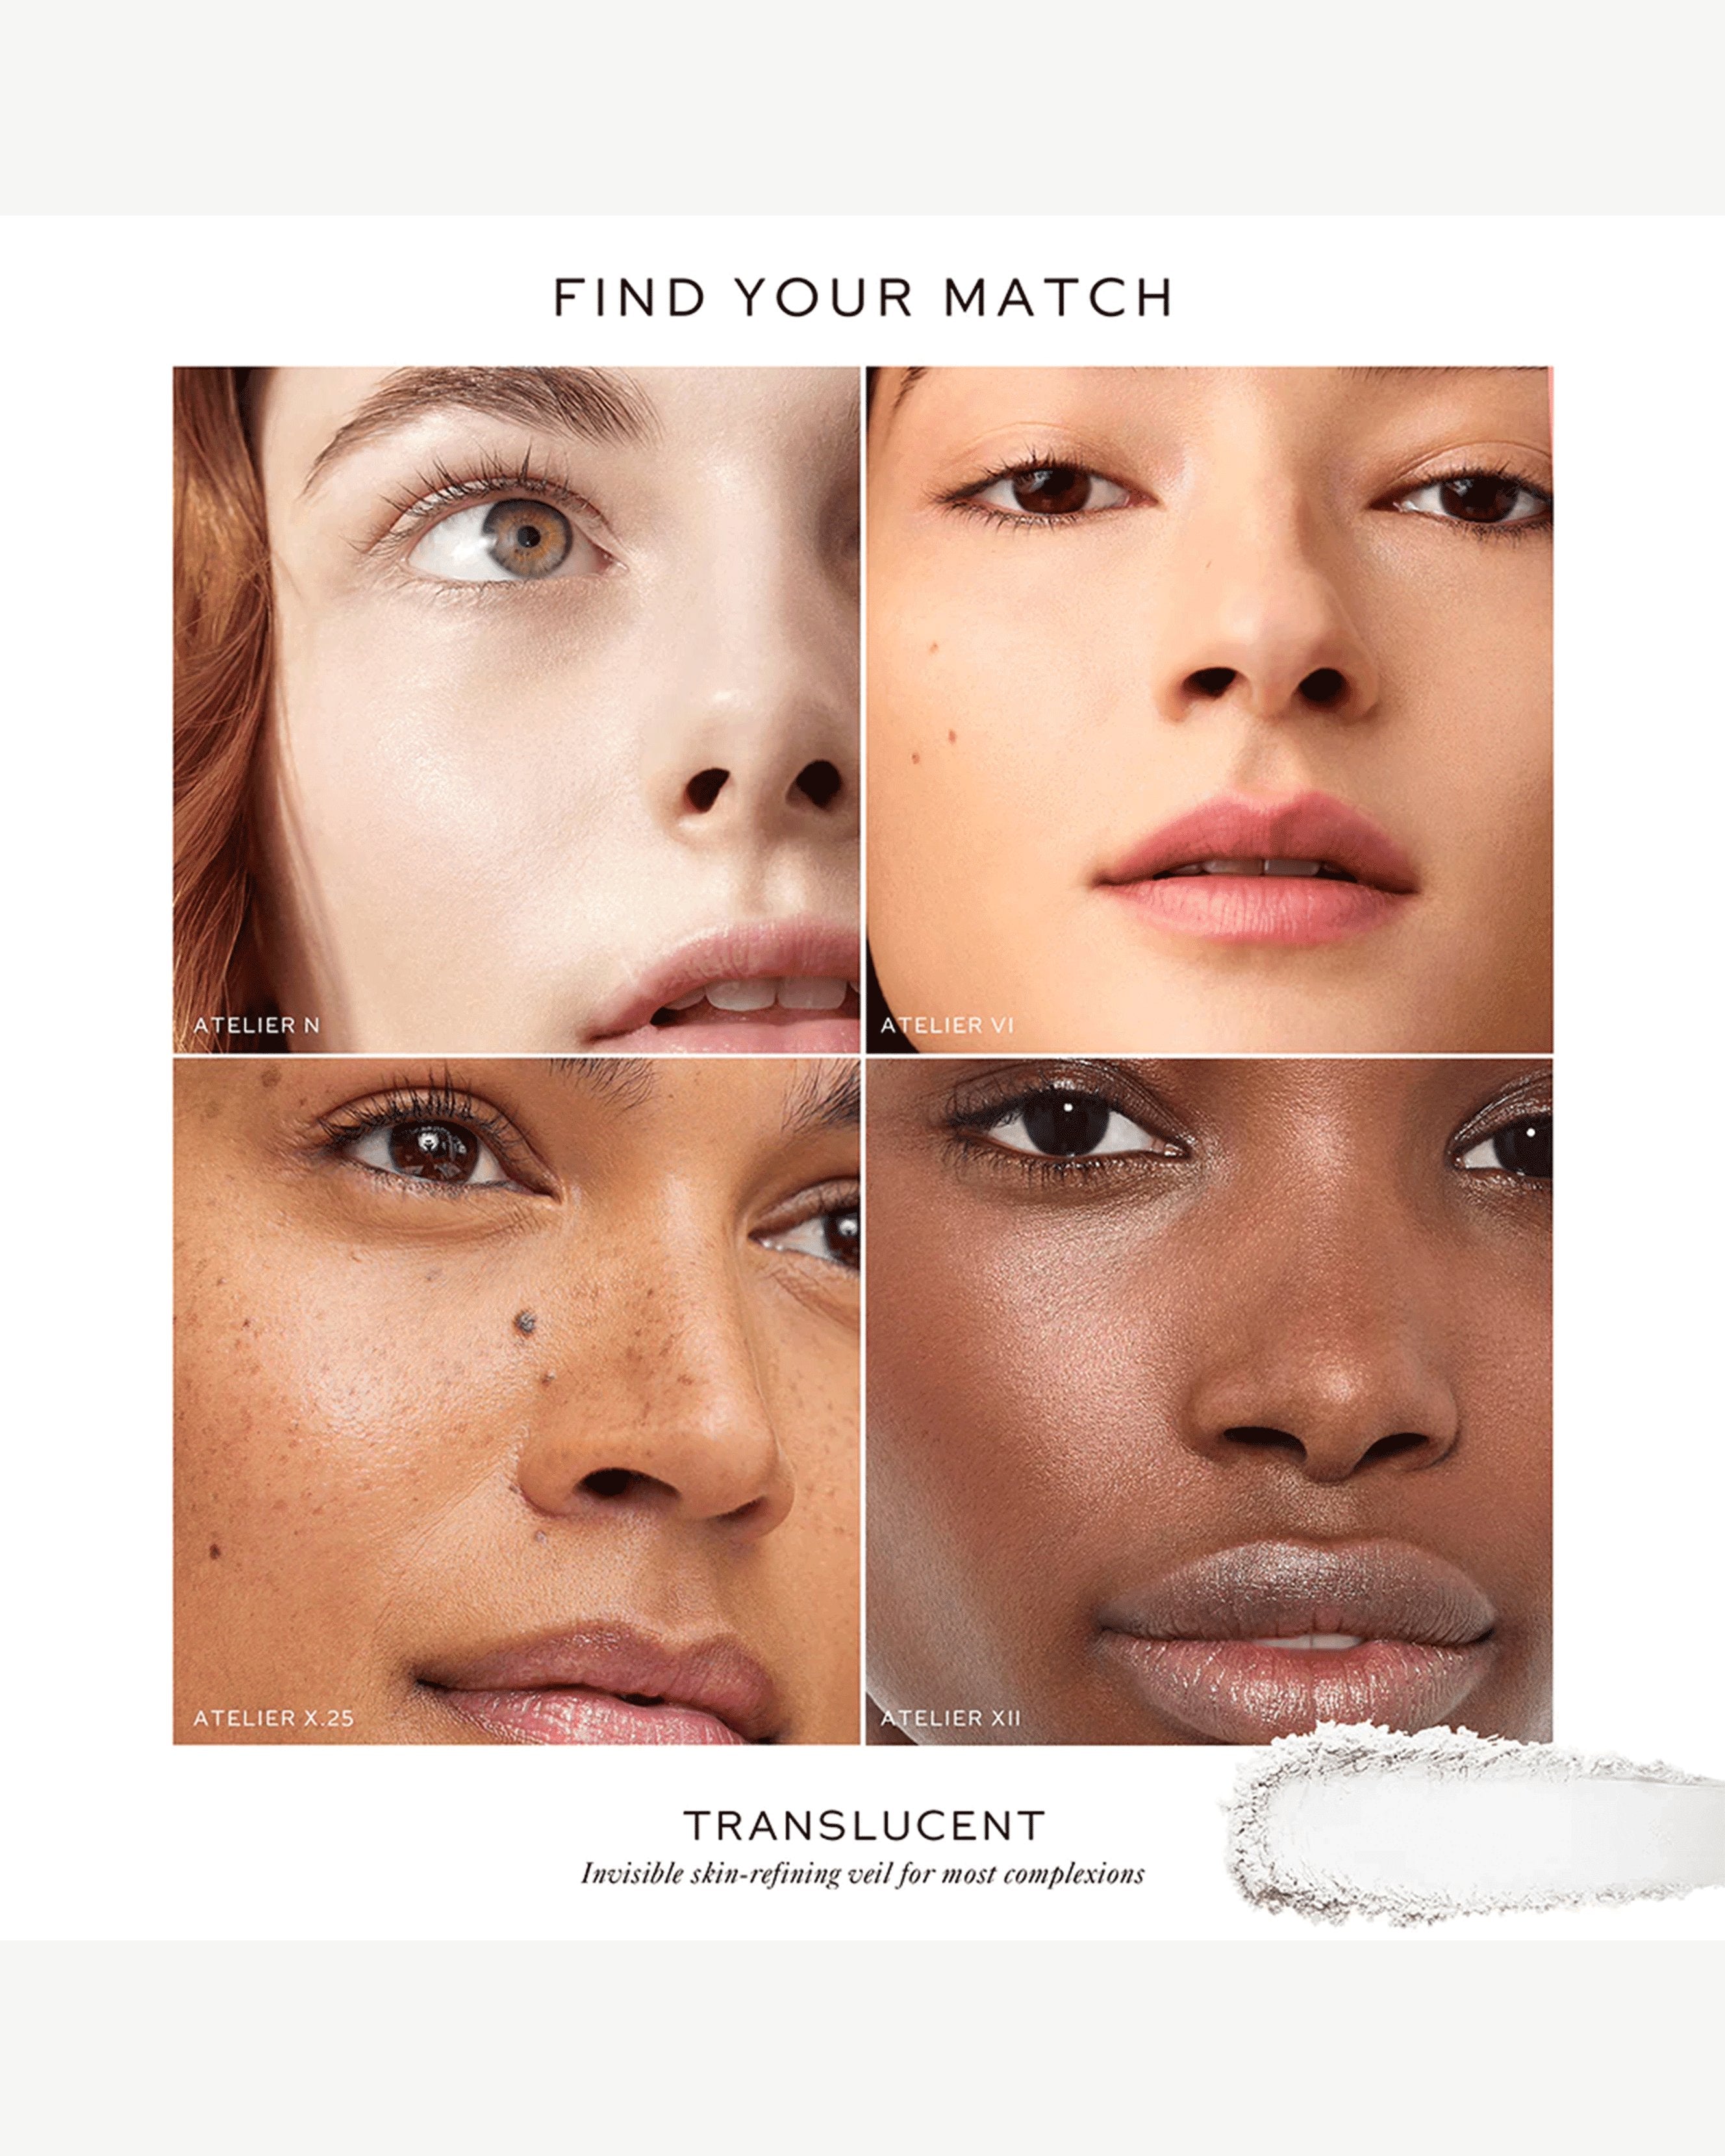 Translucent (works on most complexions)